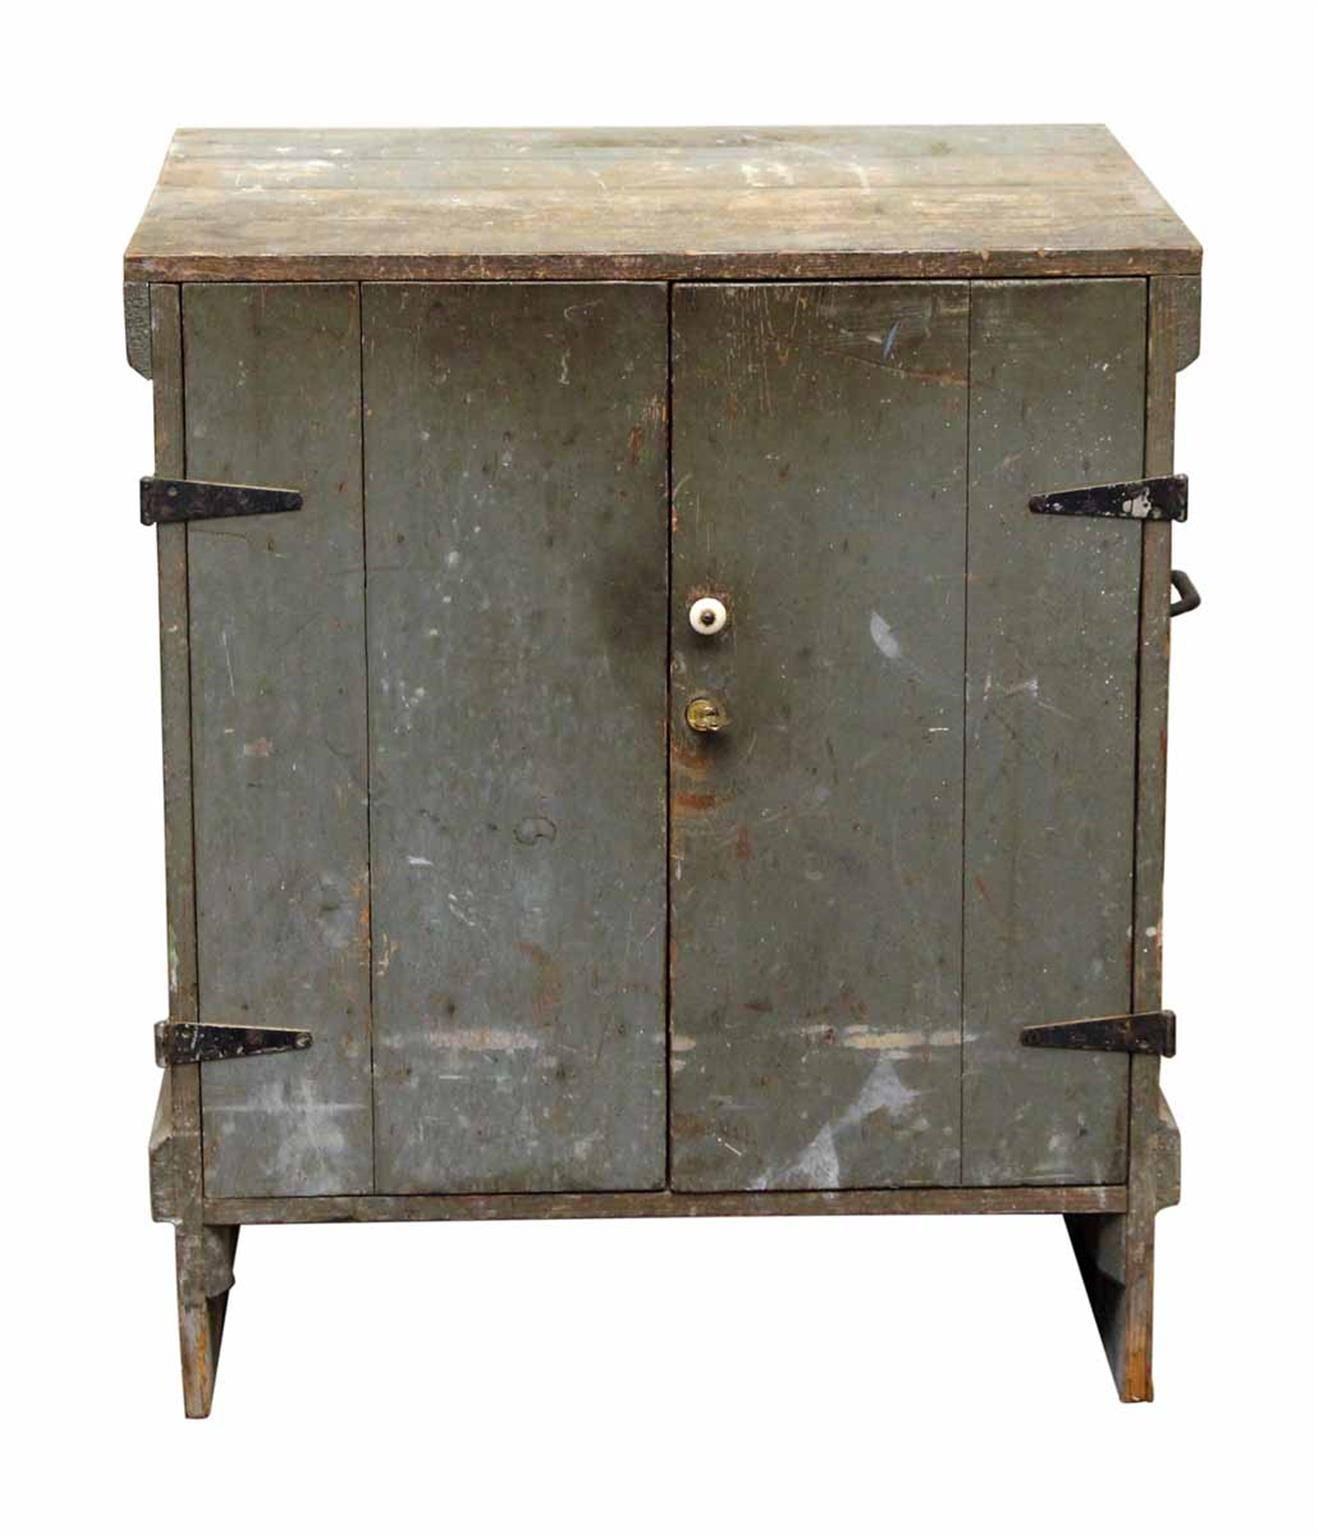 1920s antique wooden tool cabinet featuring five interior drawers, a porcelain knob, black iron hardware and original key. Nicely worn from age and use. This can be seen at our 1800 South Grand location in downtown Los Angeles..